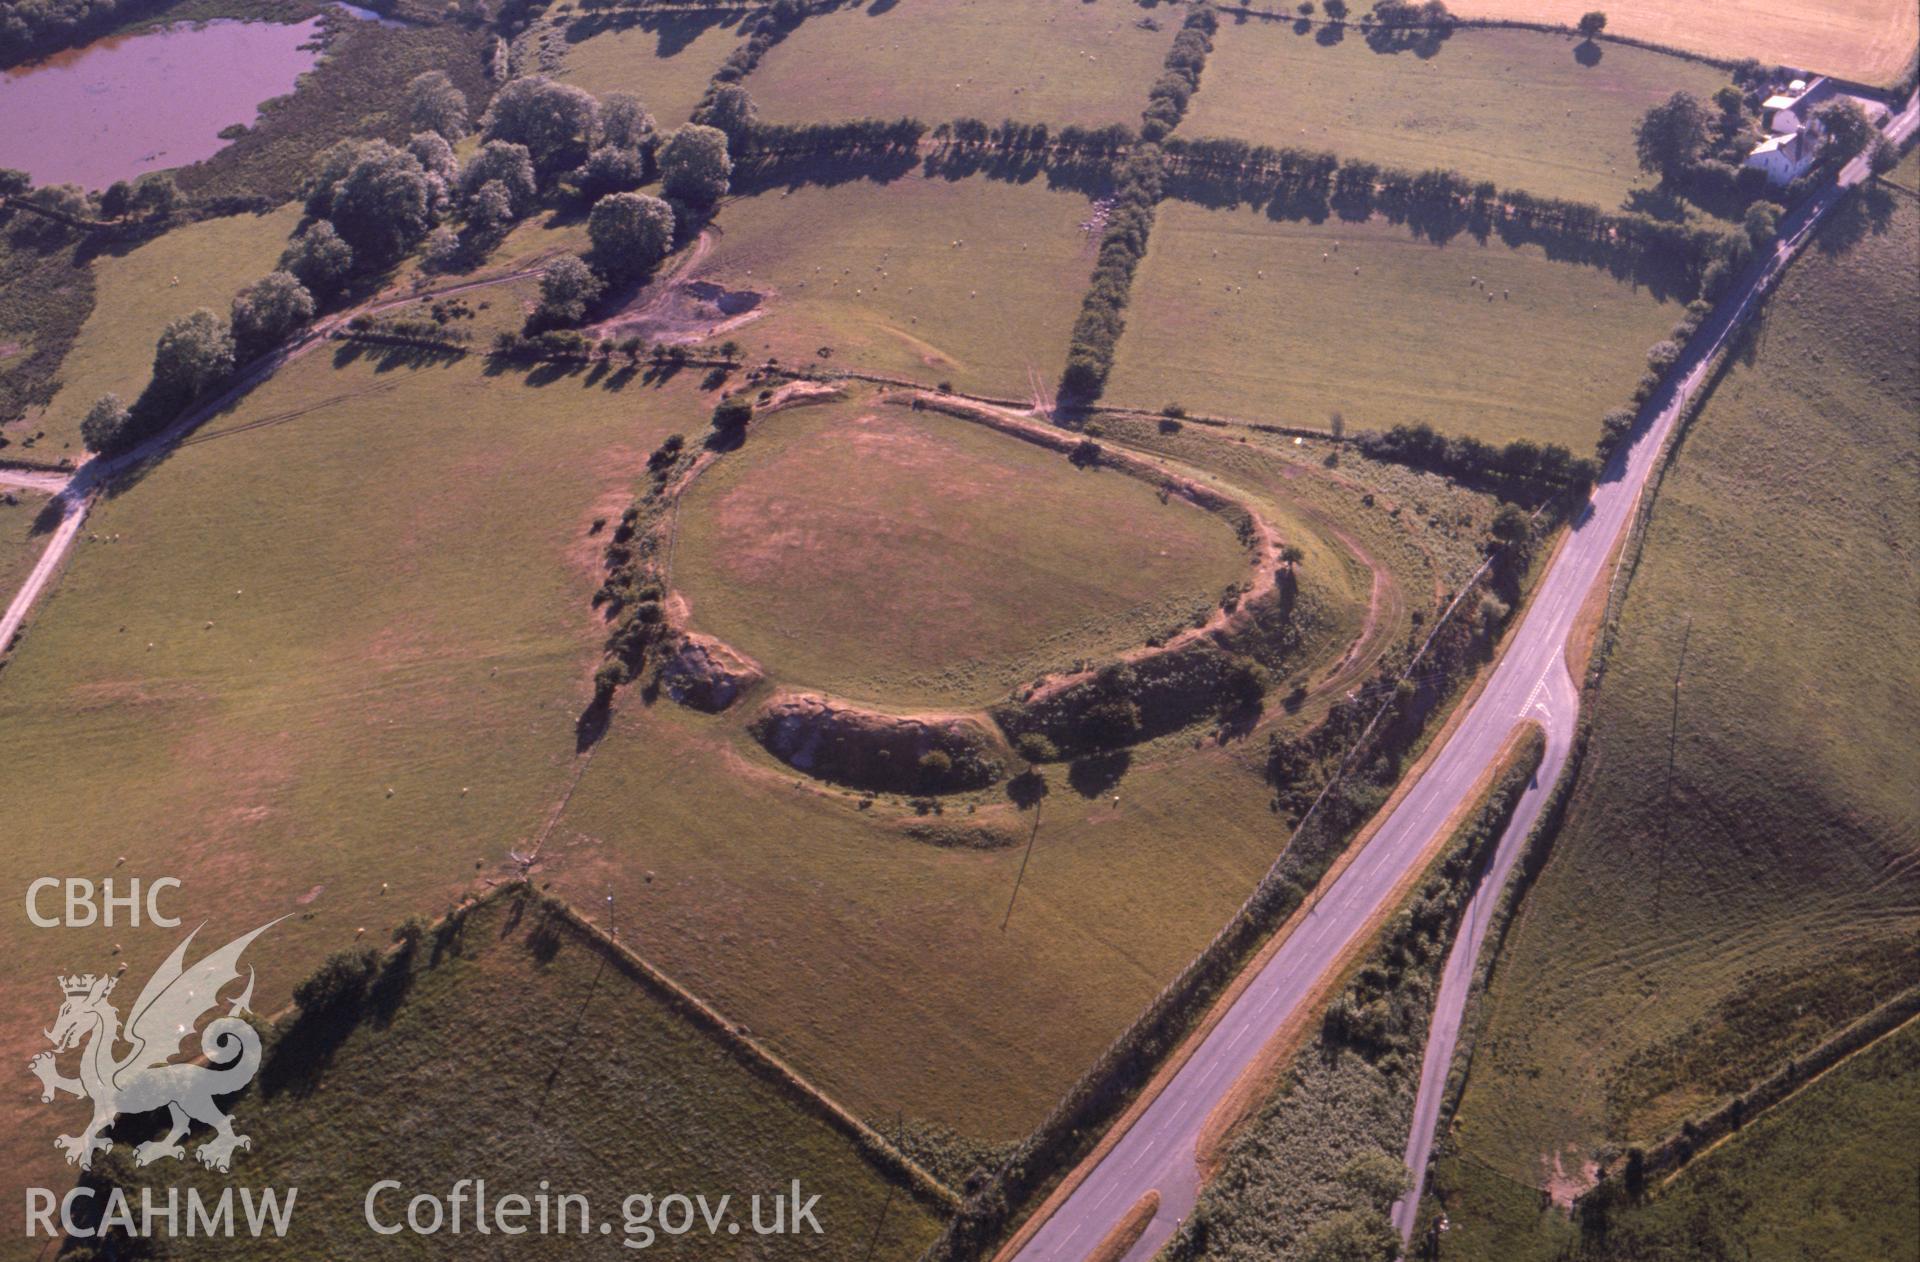 Slide of RCAHMW colour oblique aerial photograph of Castell Flemish, Hillfort, taken by C.R. Musson, 24/6/1989.